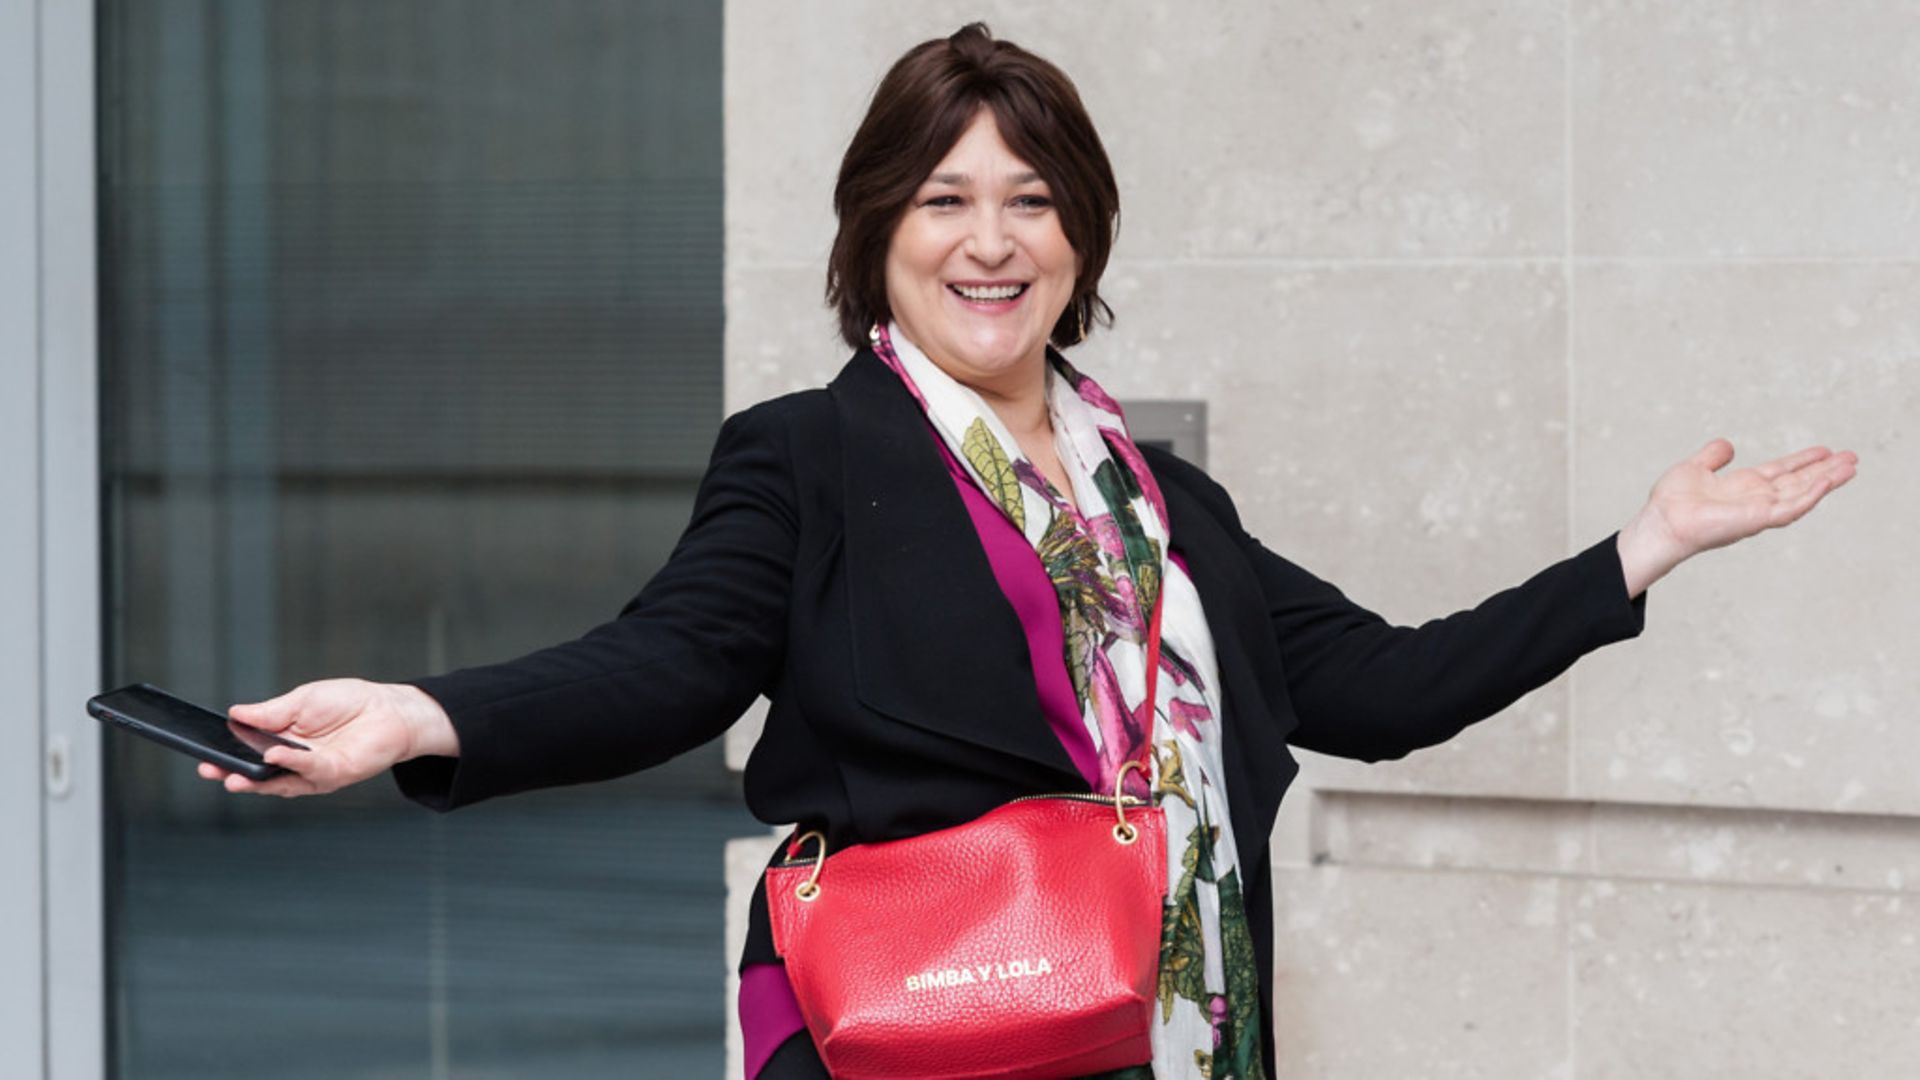 Daily Mail newspaper columnist and Michael Gove's wife, Sarah Vine - Credit: Barcroft Media via Getty Images